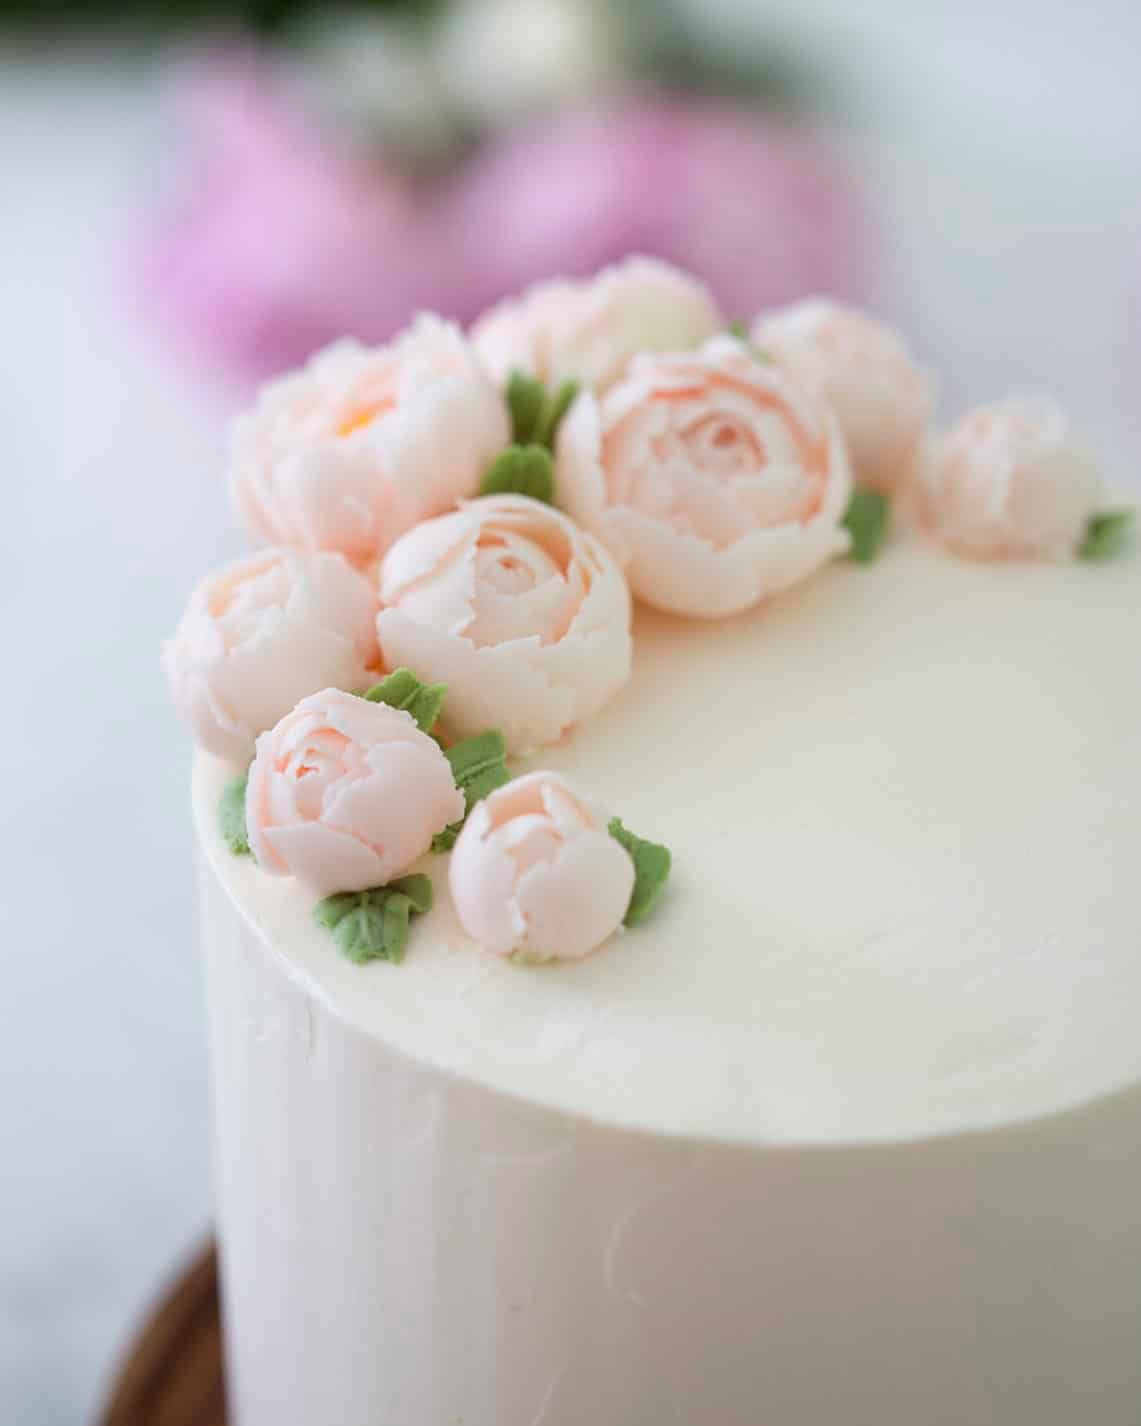 Close up 3/4 view of a lemon elderflower cake topped with soft pink buttercream peonies